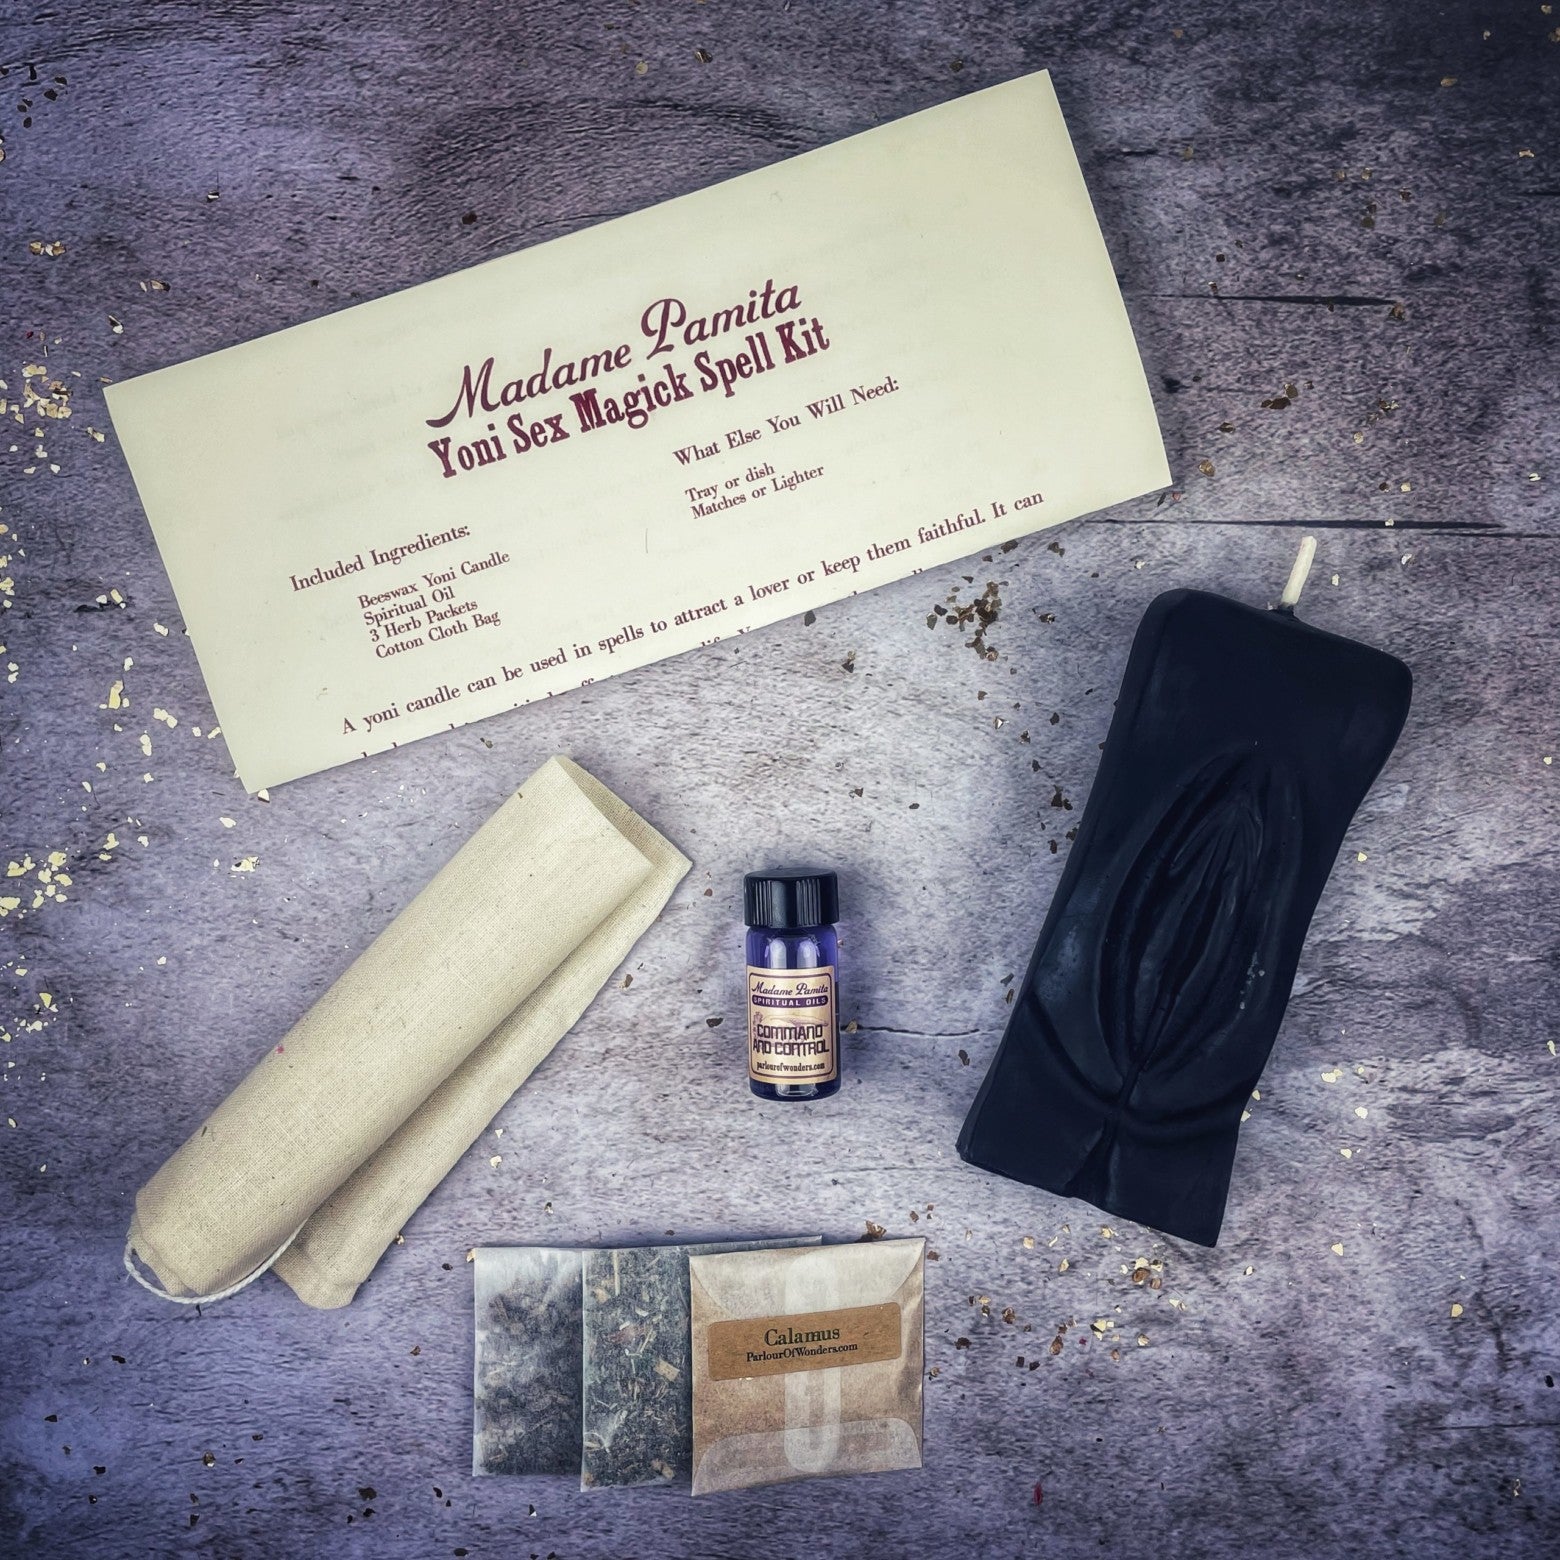 Yoni Sex Magick Candle Spell Kit